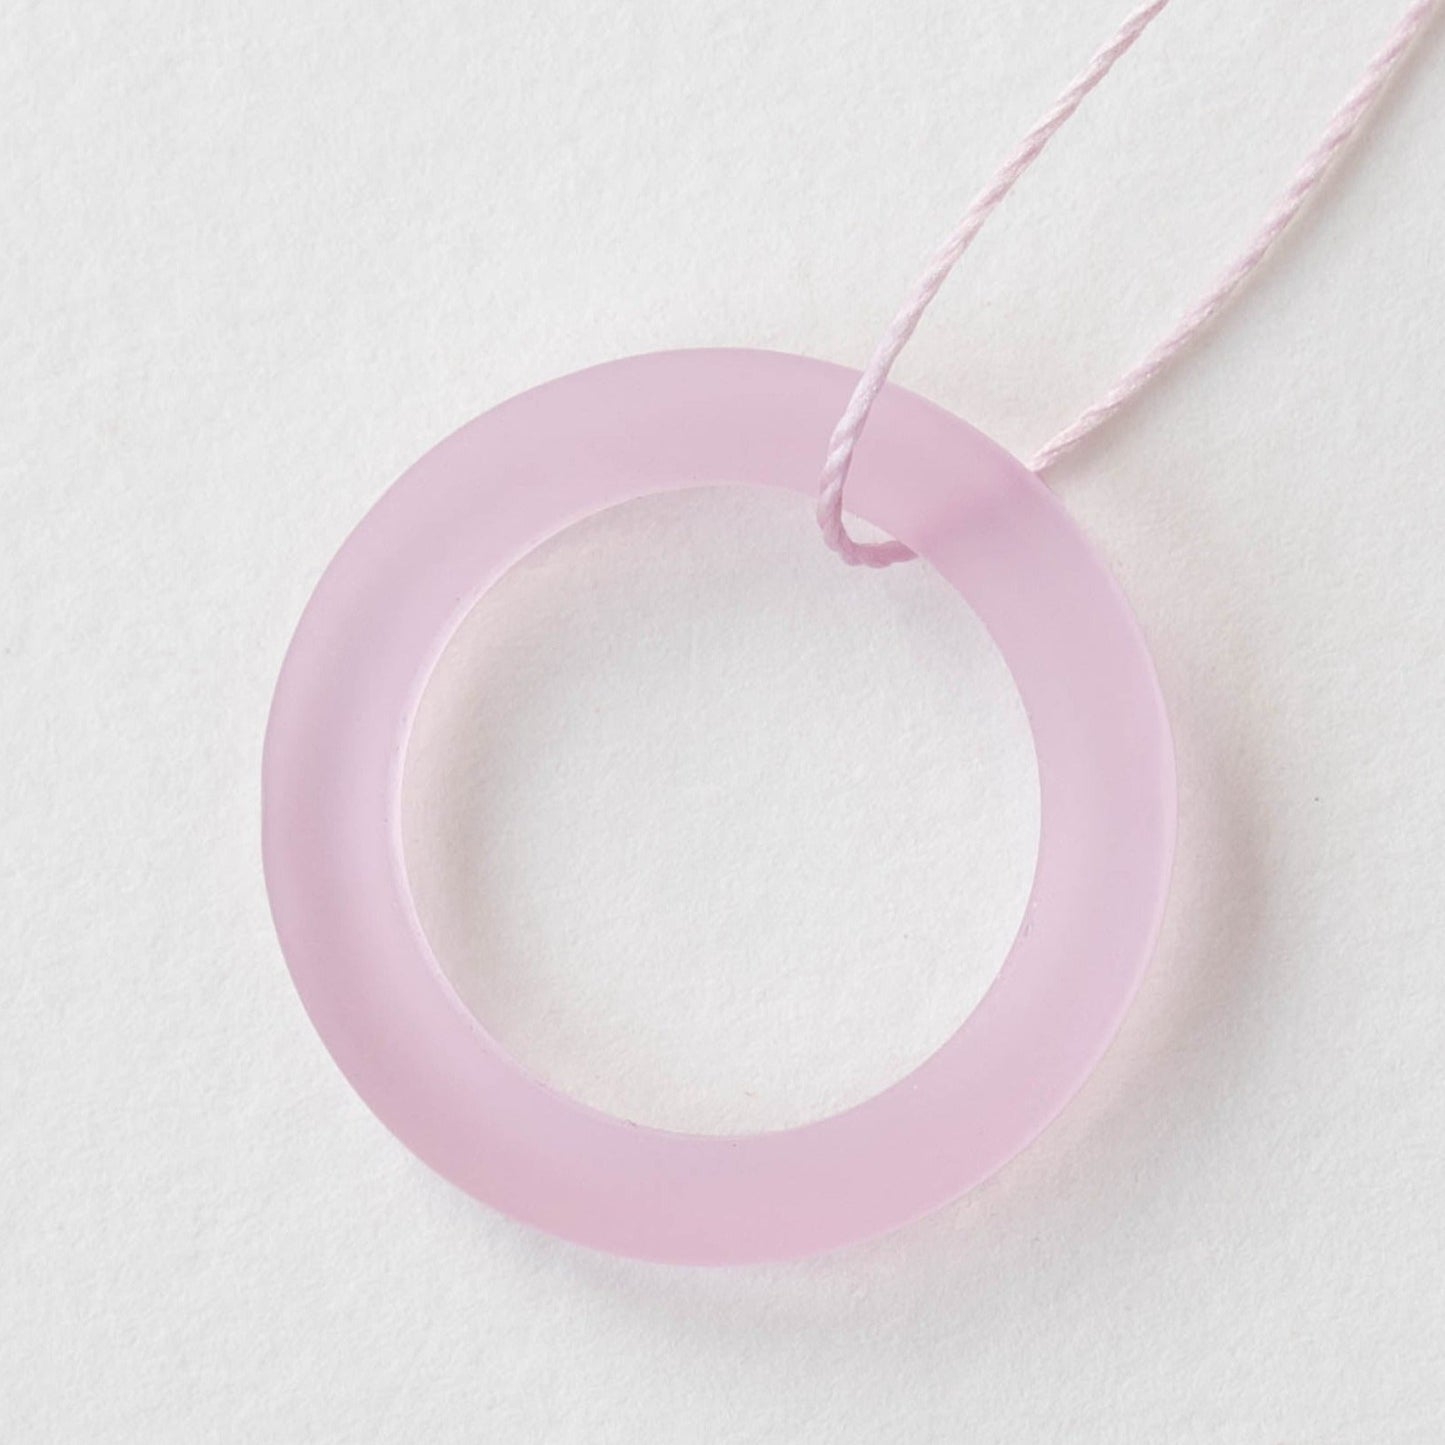 Load image into Gallery viewer, 27mm Frosted Glass Rings - Pink - 2 Rings
